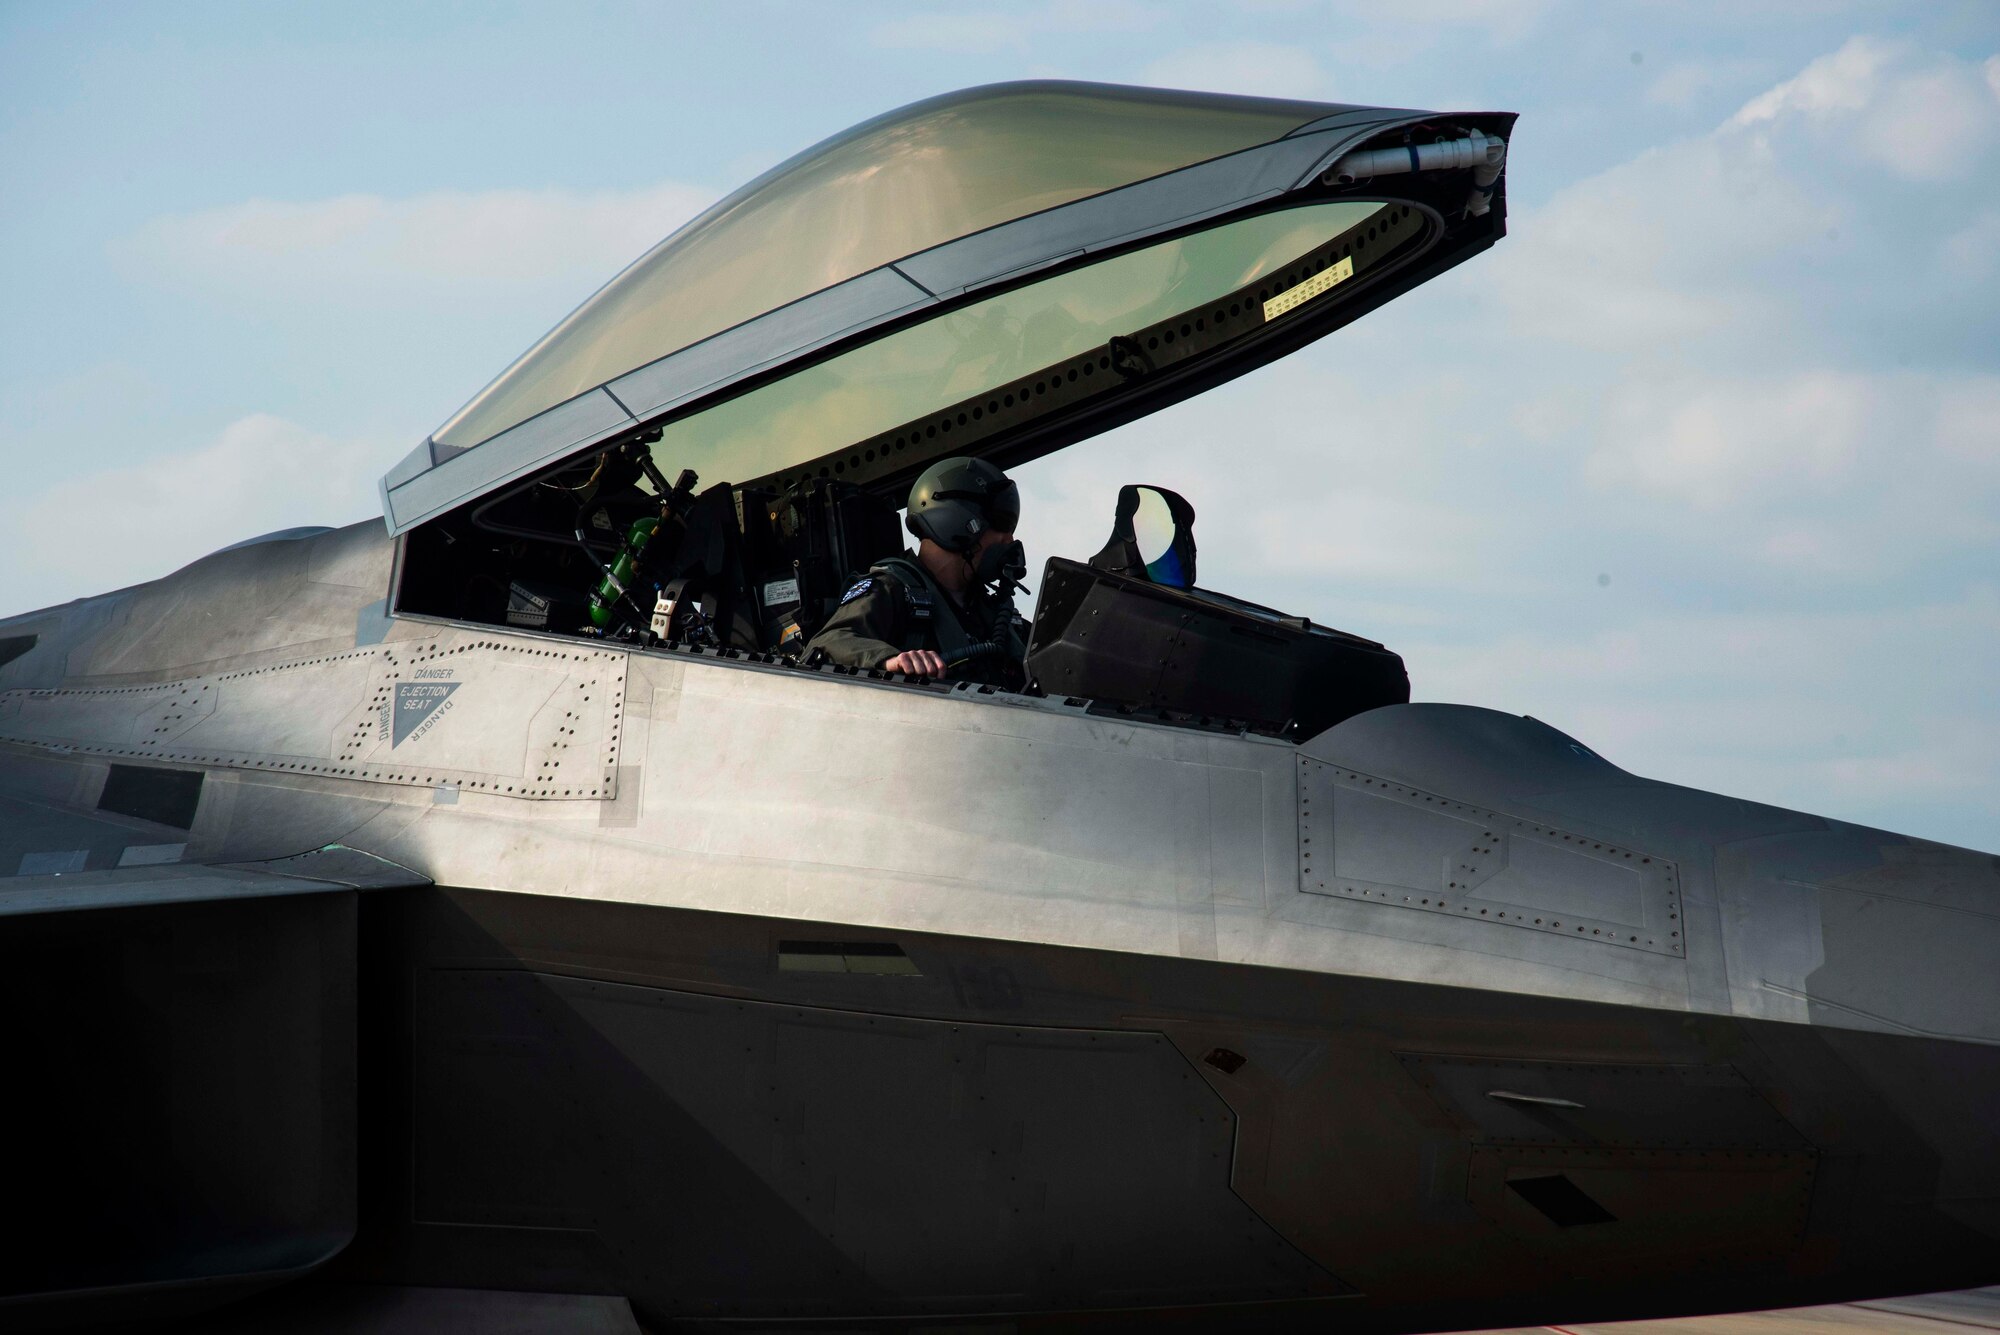 A pilot of an F-22 Raptor poses for a photo Nov. 6, 2019, at Tyndall Air Force Base, Florida. The pilot, airframe, and maintenance team supported Checkered Flag 20-1, which is a large-scale aerial exercise designed to integrate fourth and fifth-generation airframes to enhance mobility, deployment, and employment capabilities of aviators and maintainers. The exercise involved airpower assets, more than 50 aircraft, and support personnel from multiple installations. Aircraft and pilots participated in a Weapons System Evaluation Program and are evaluated on air-to-air and air-to-ground operations, providing a unique training environment. (U.S. Air Force photo by Staff Sgt. Magen M. Reeves)